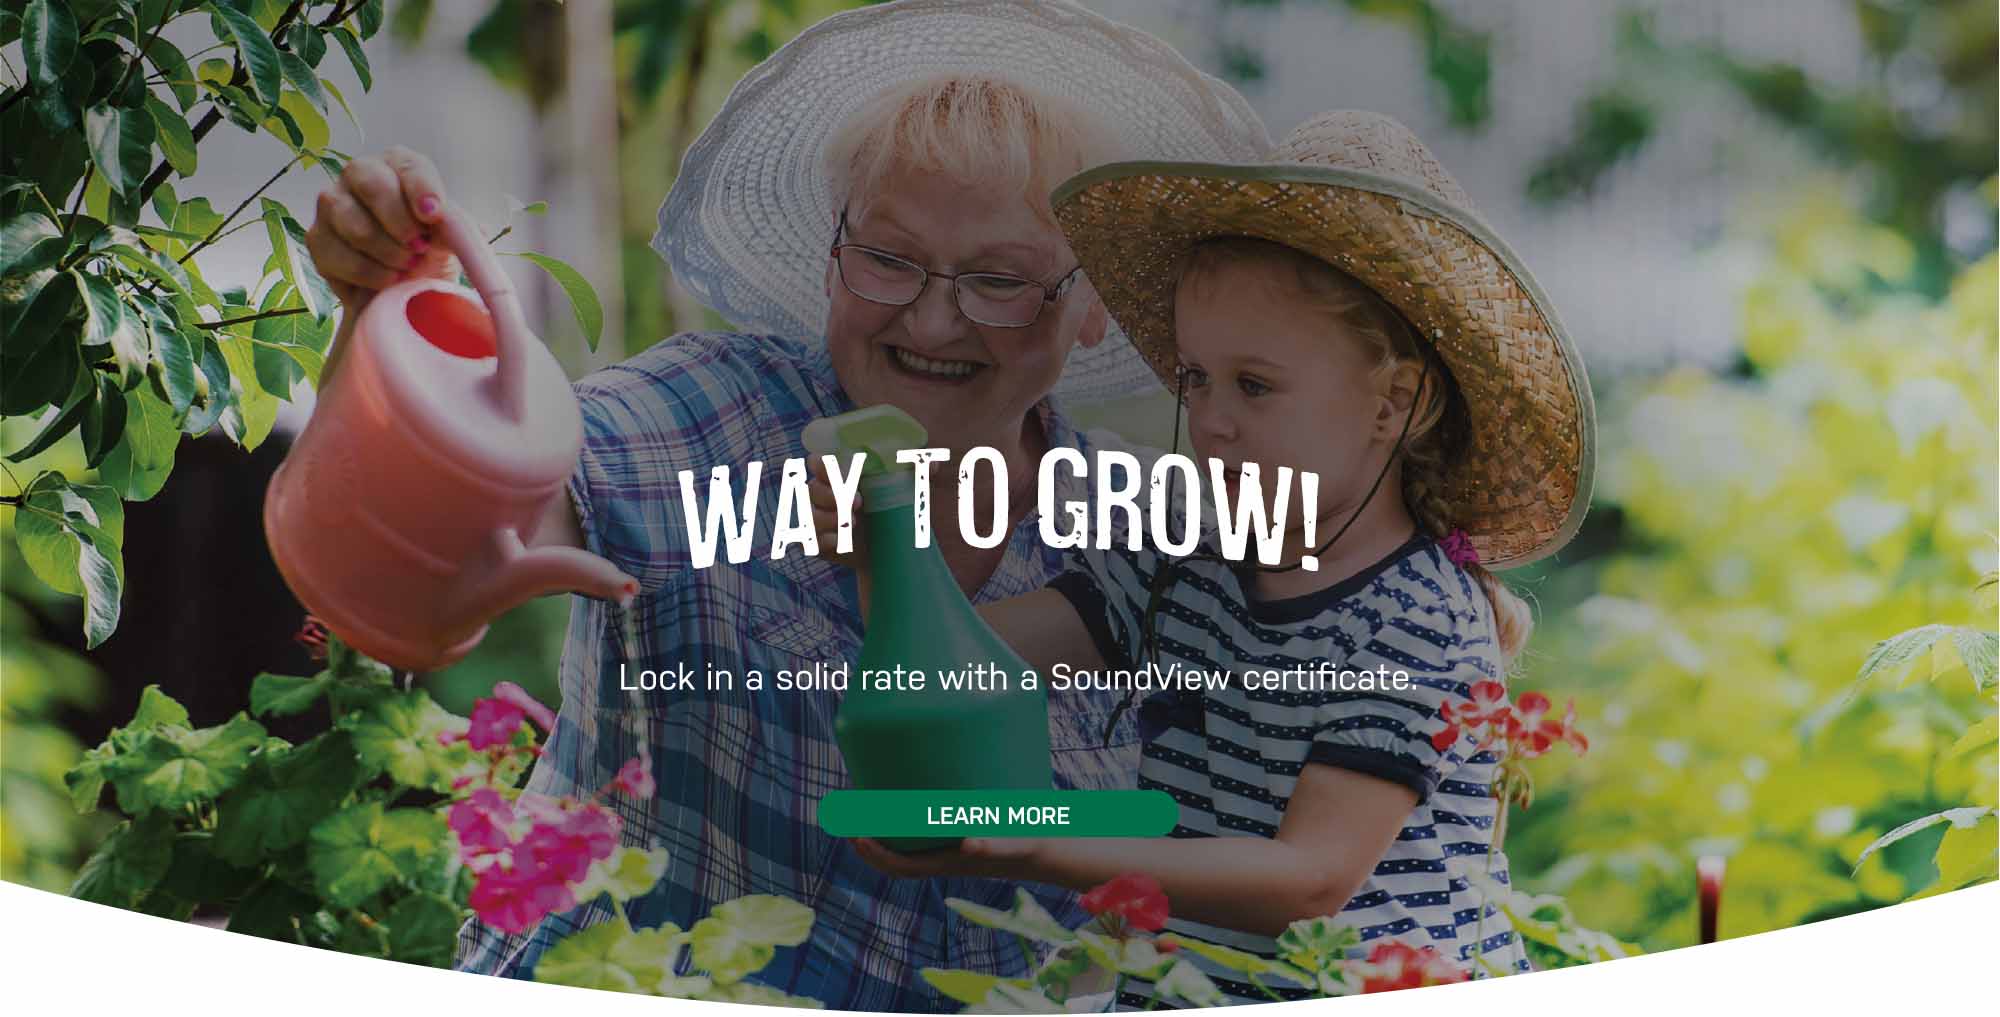 Way to Grow! Lock in a solid rate with a SoundView Certificate. Learn More